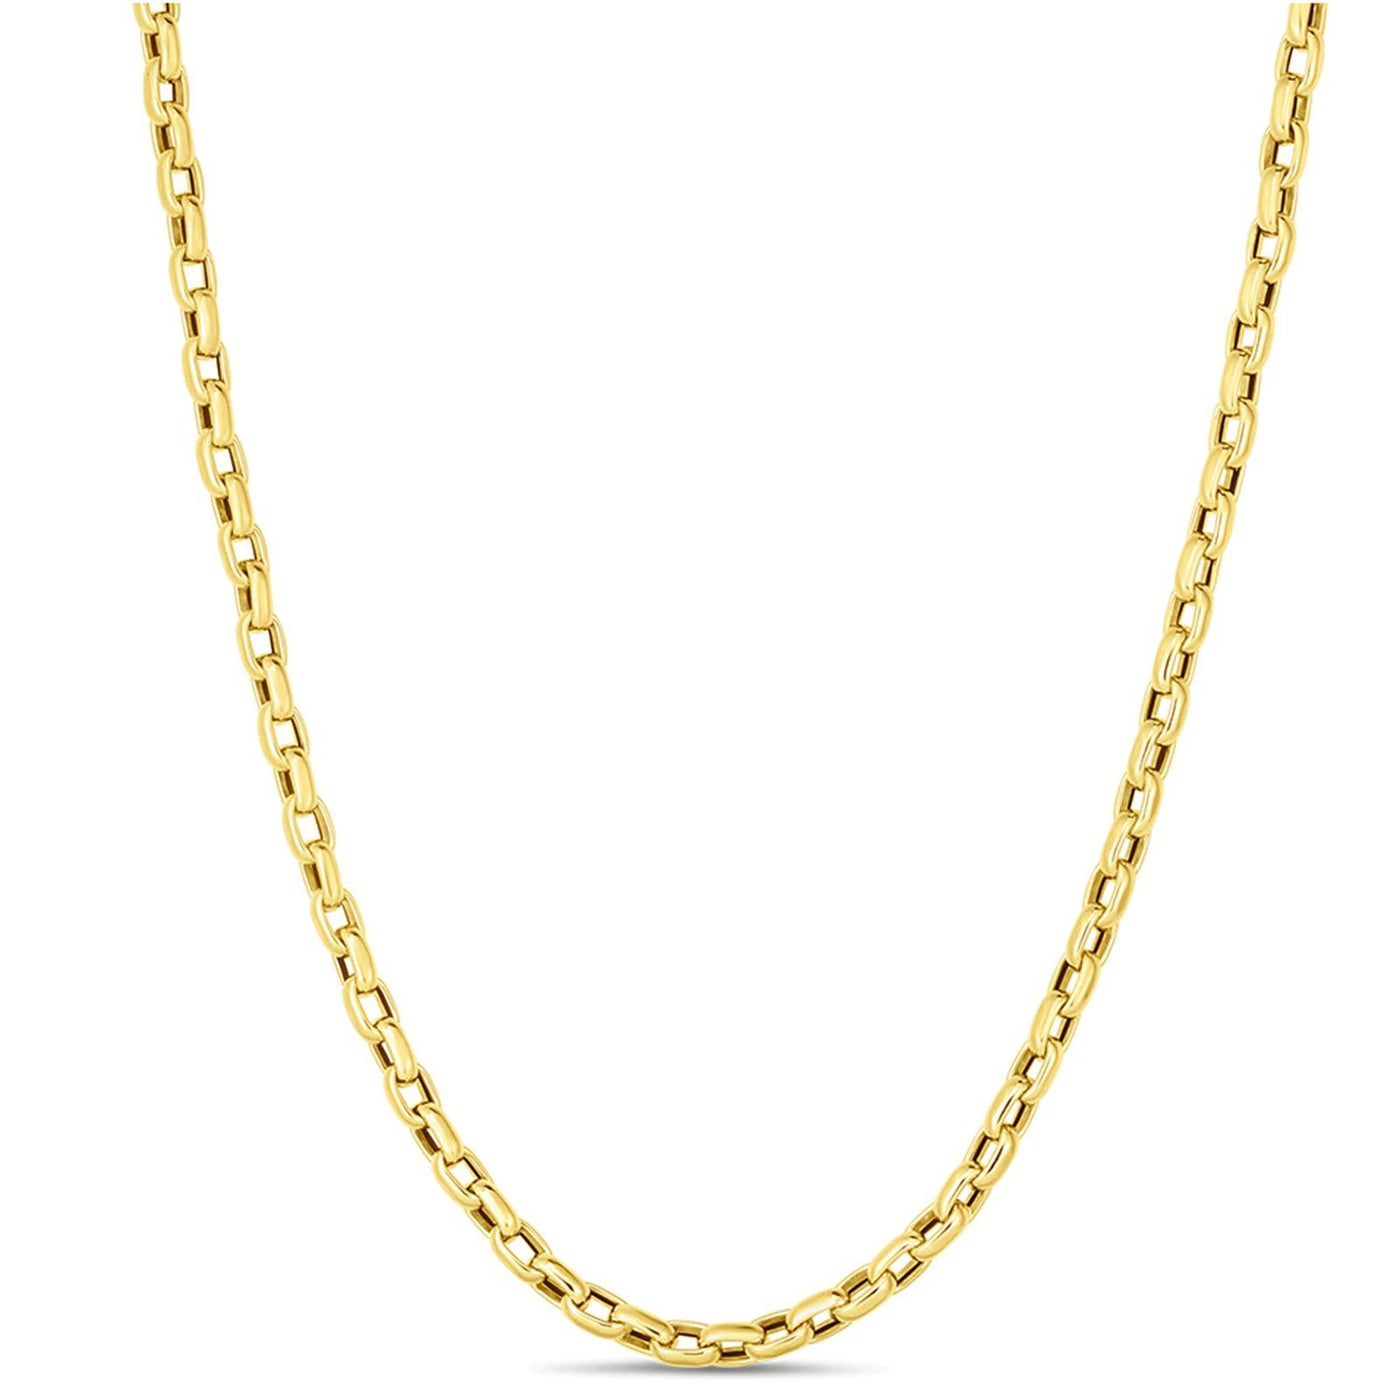 Roberto Coin 18K Yellow Gold Roberto Coin Gold Square Link Chain Necklace Necklaces